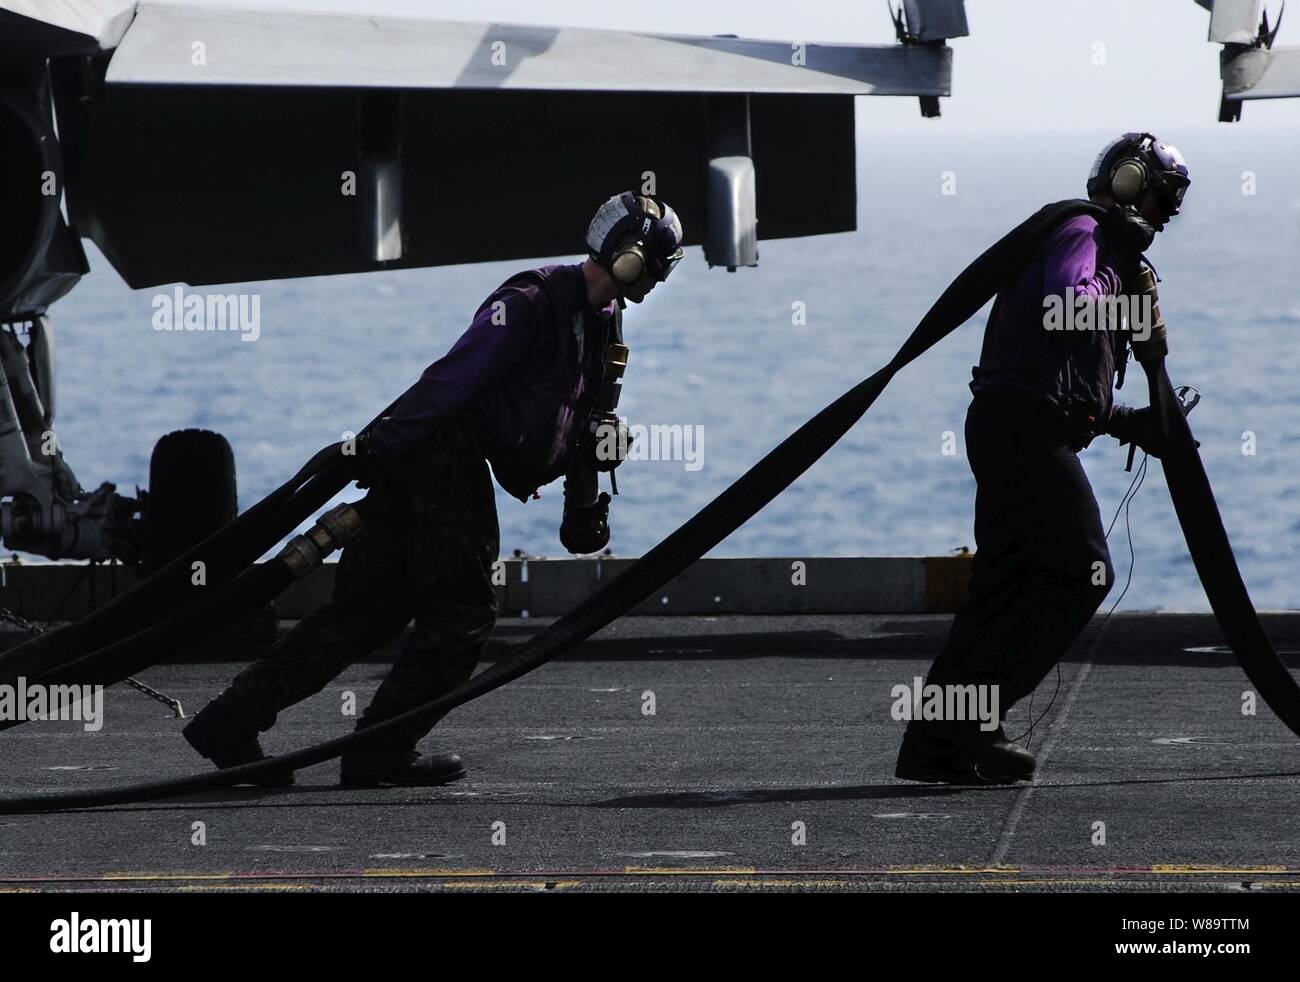 U.S. Navy sailors from the air department's flight deck aircraft handling division heave fuel hoses out to refuel aircraft aboard the aircraft carrier USS John C. Stennis (CVN 74) as the ship operates in the Arabian Sea on March 8, 2007. Stock Photo